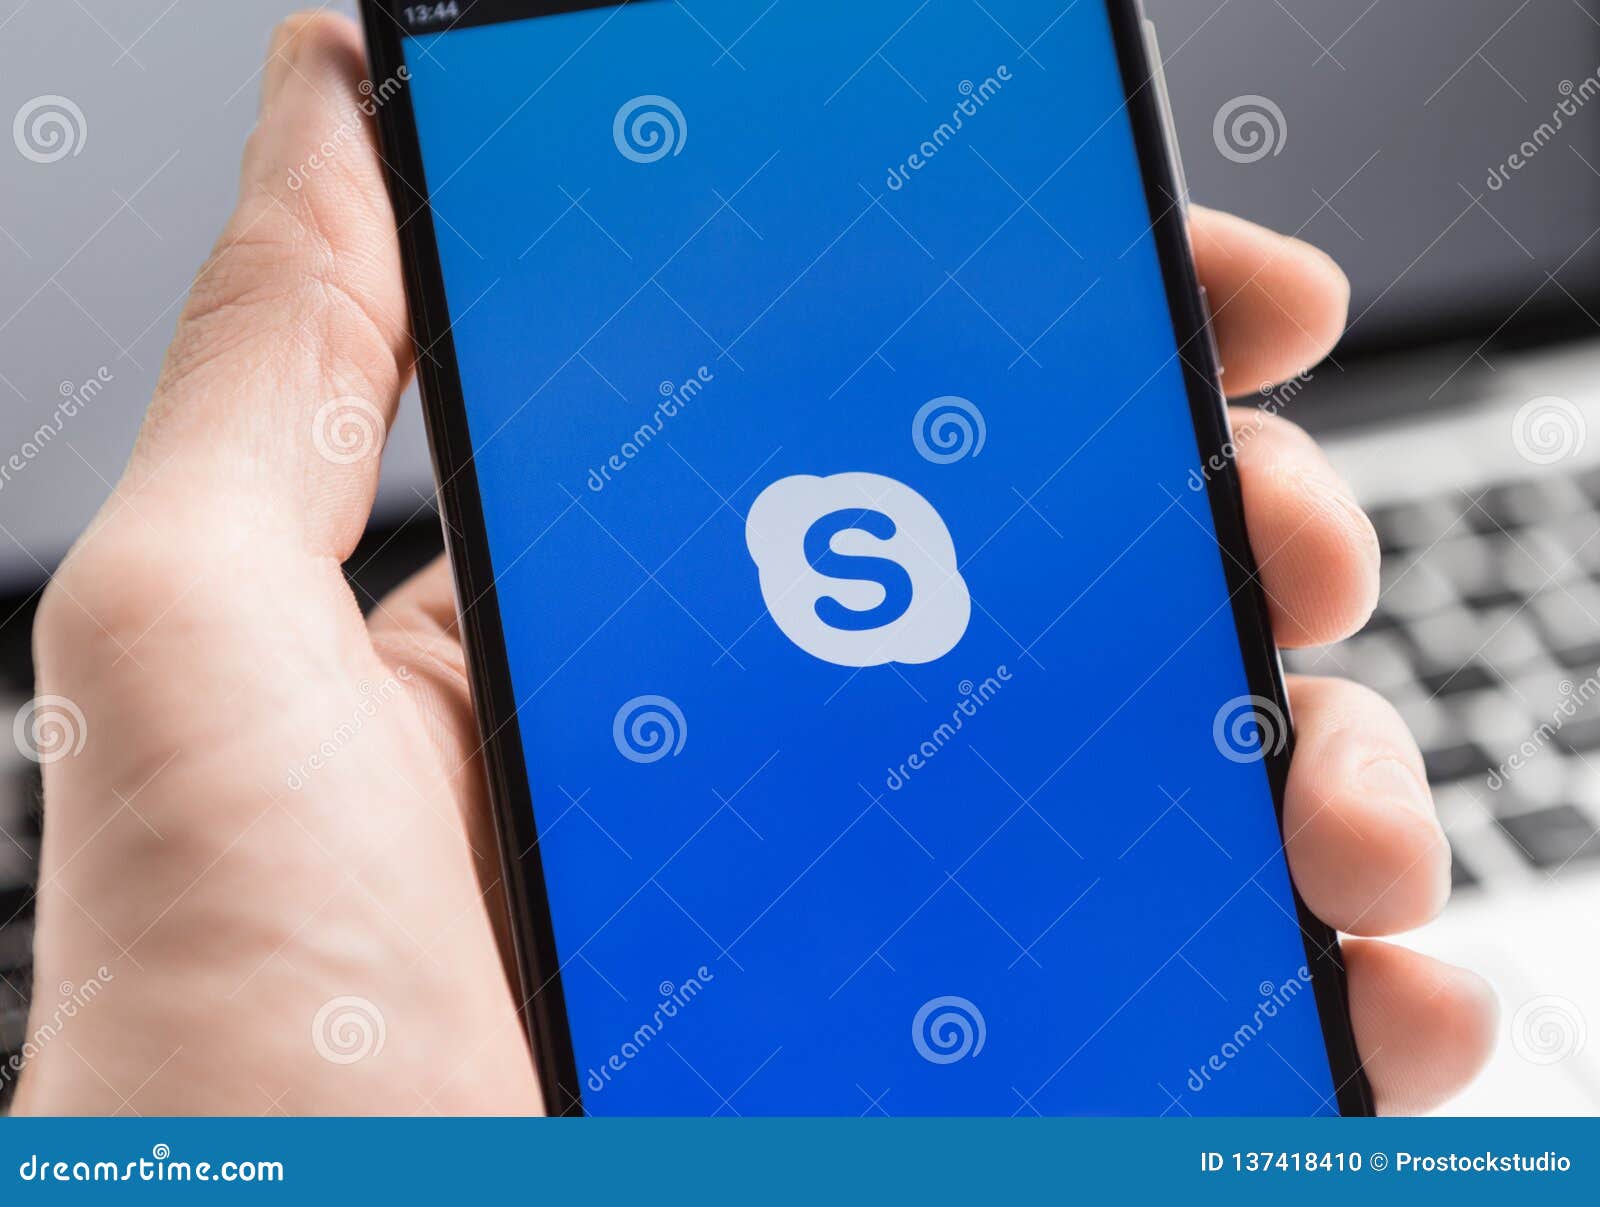 Download Skype For IPhone For Mac 4.2.2